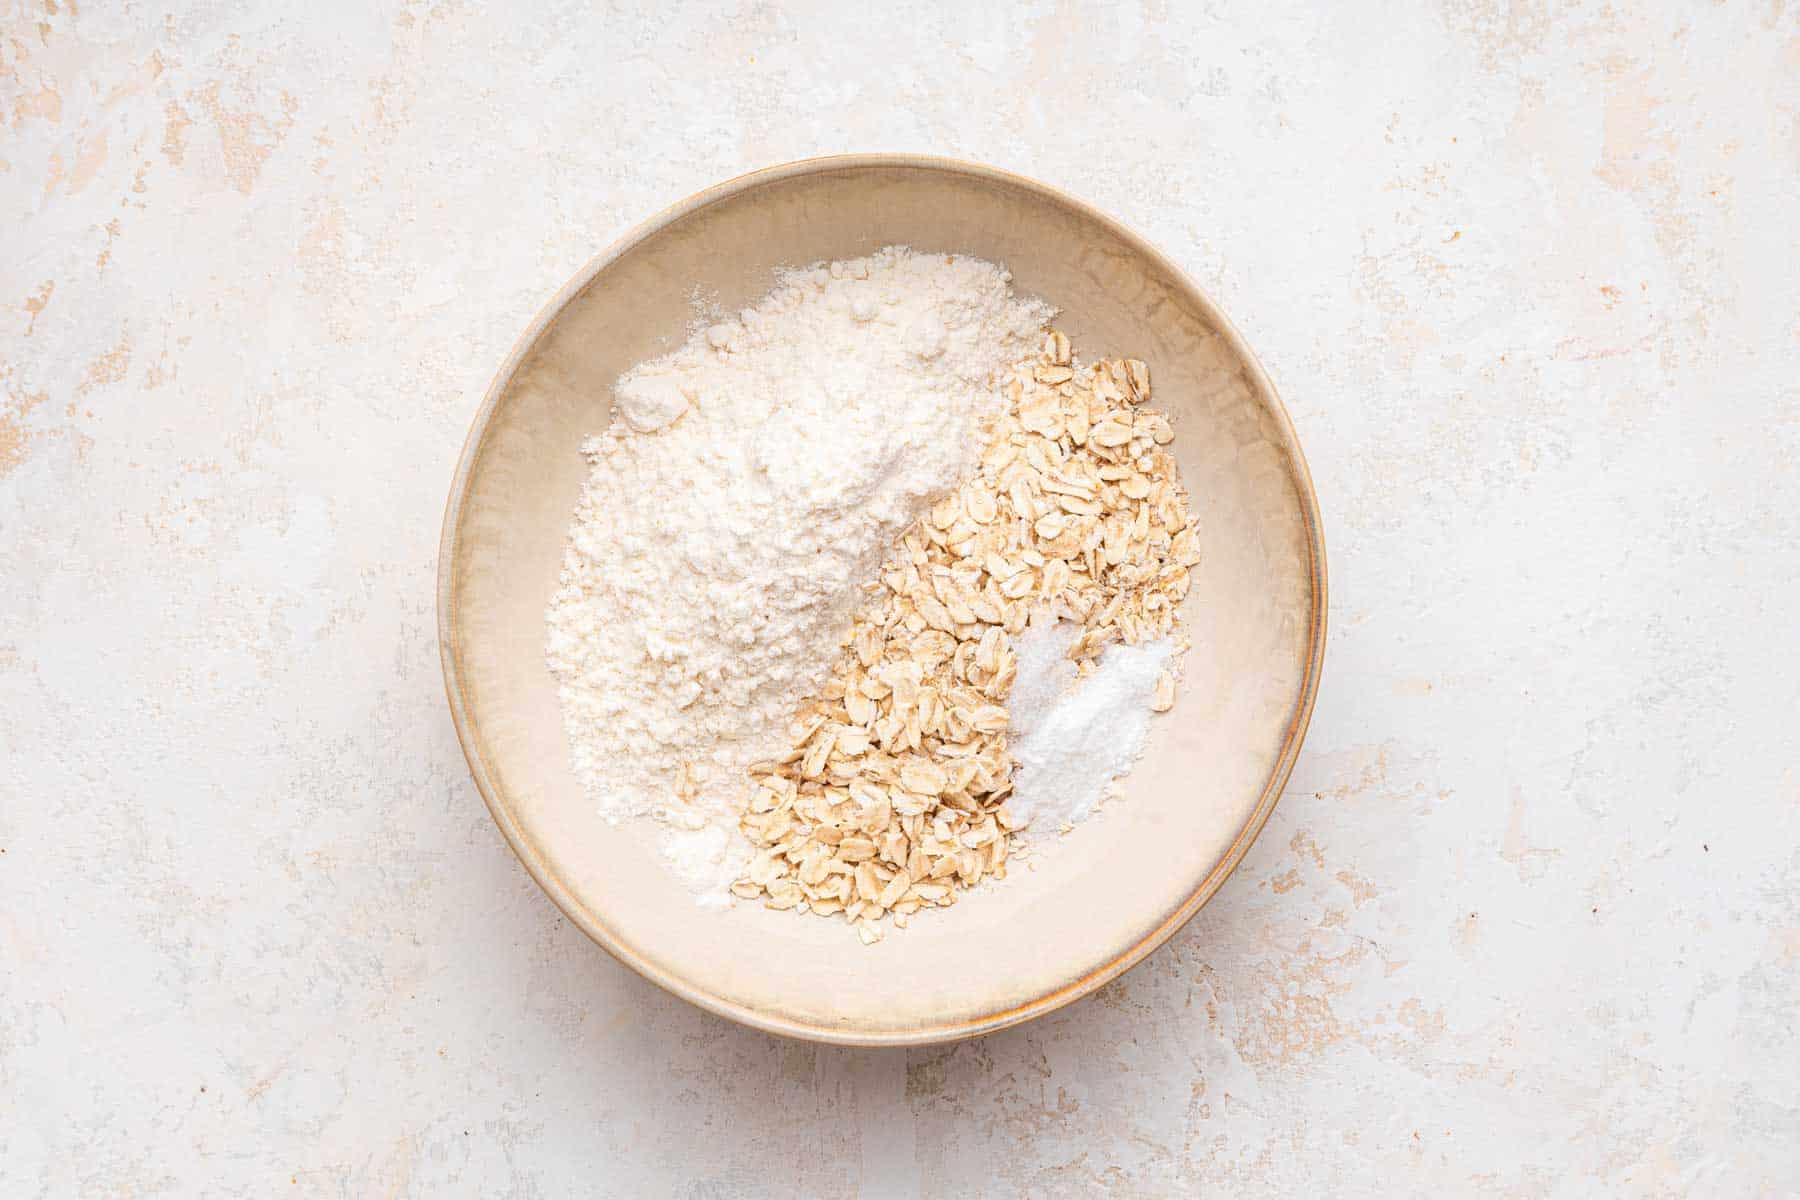 Small plate with flour, oats and baking soda.